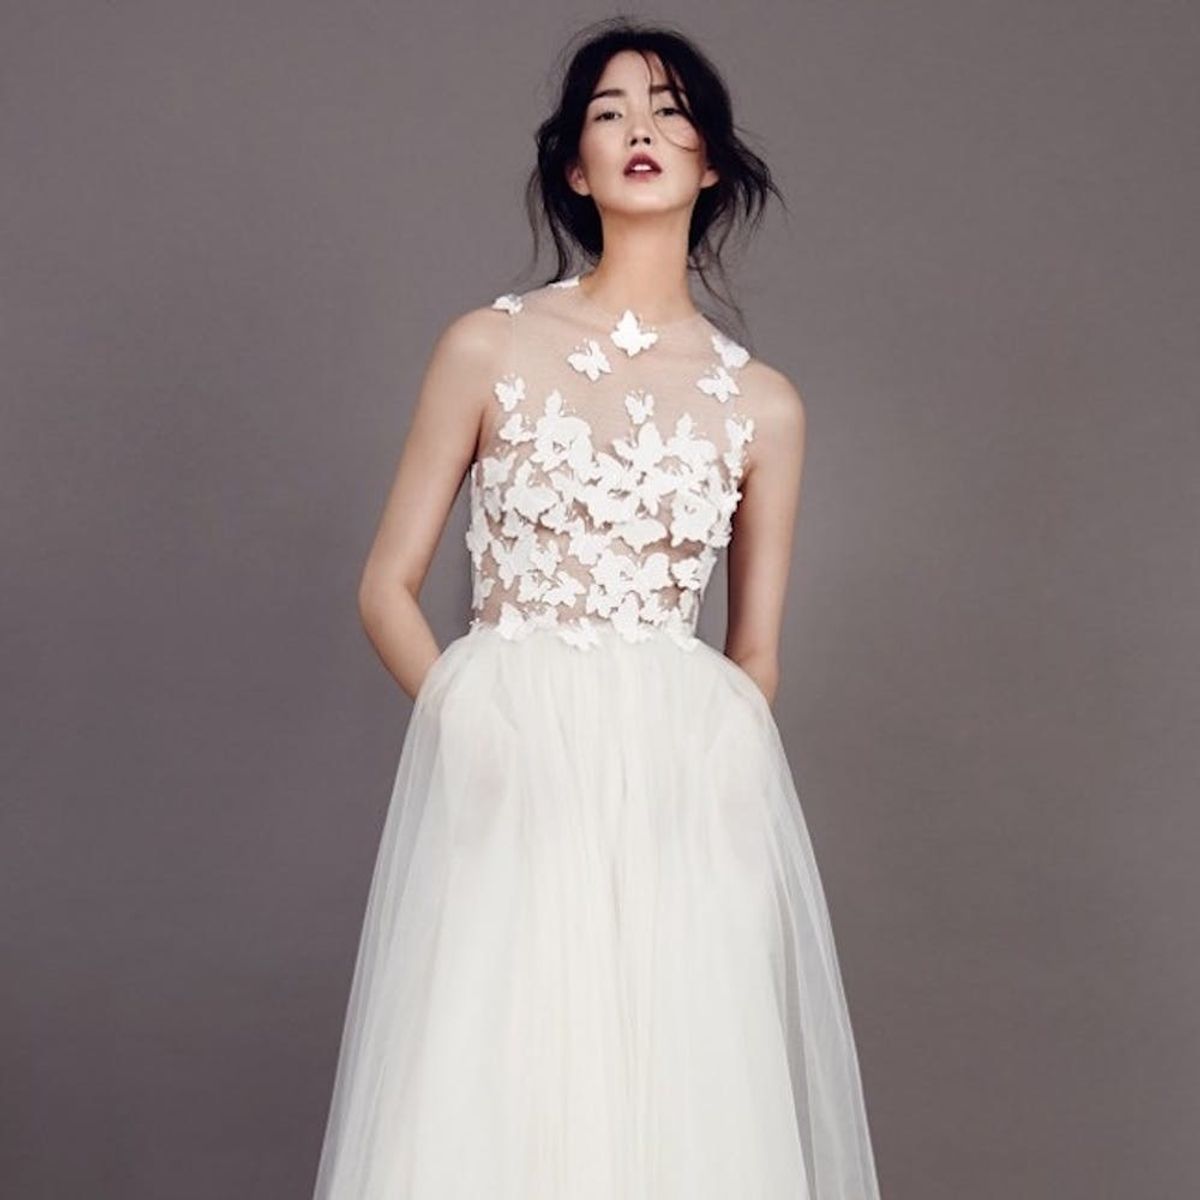 100 White Dresses to Wear to Every Wedding Event